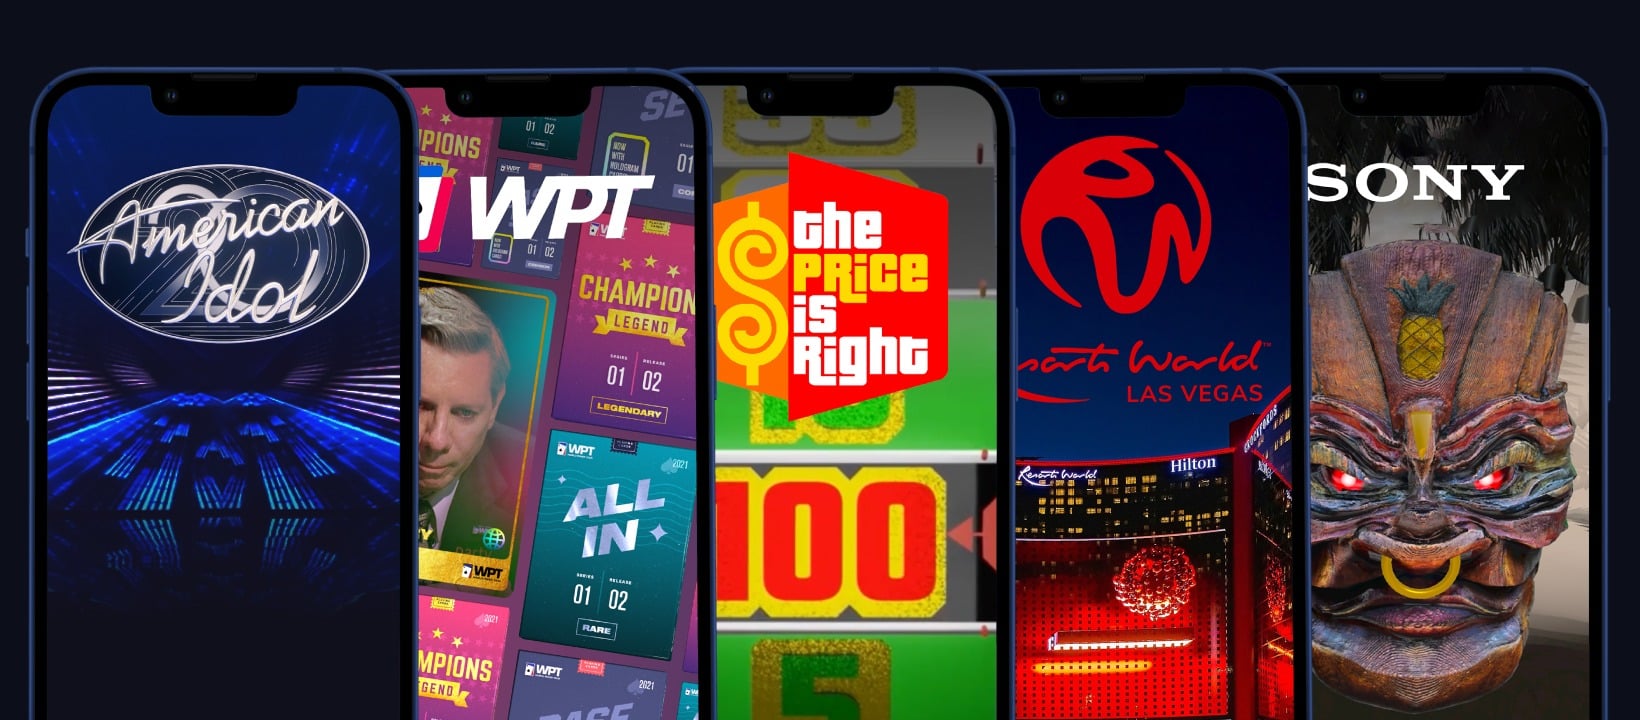 póster digital con American Idol, World Poker Tour, The Price is Right a través de ThetaDrop Marketplace